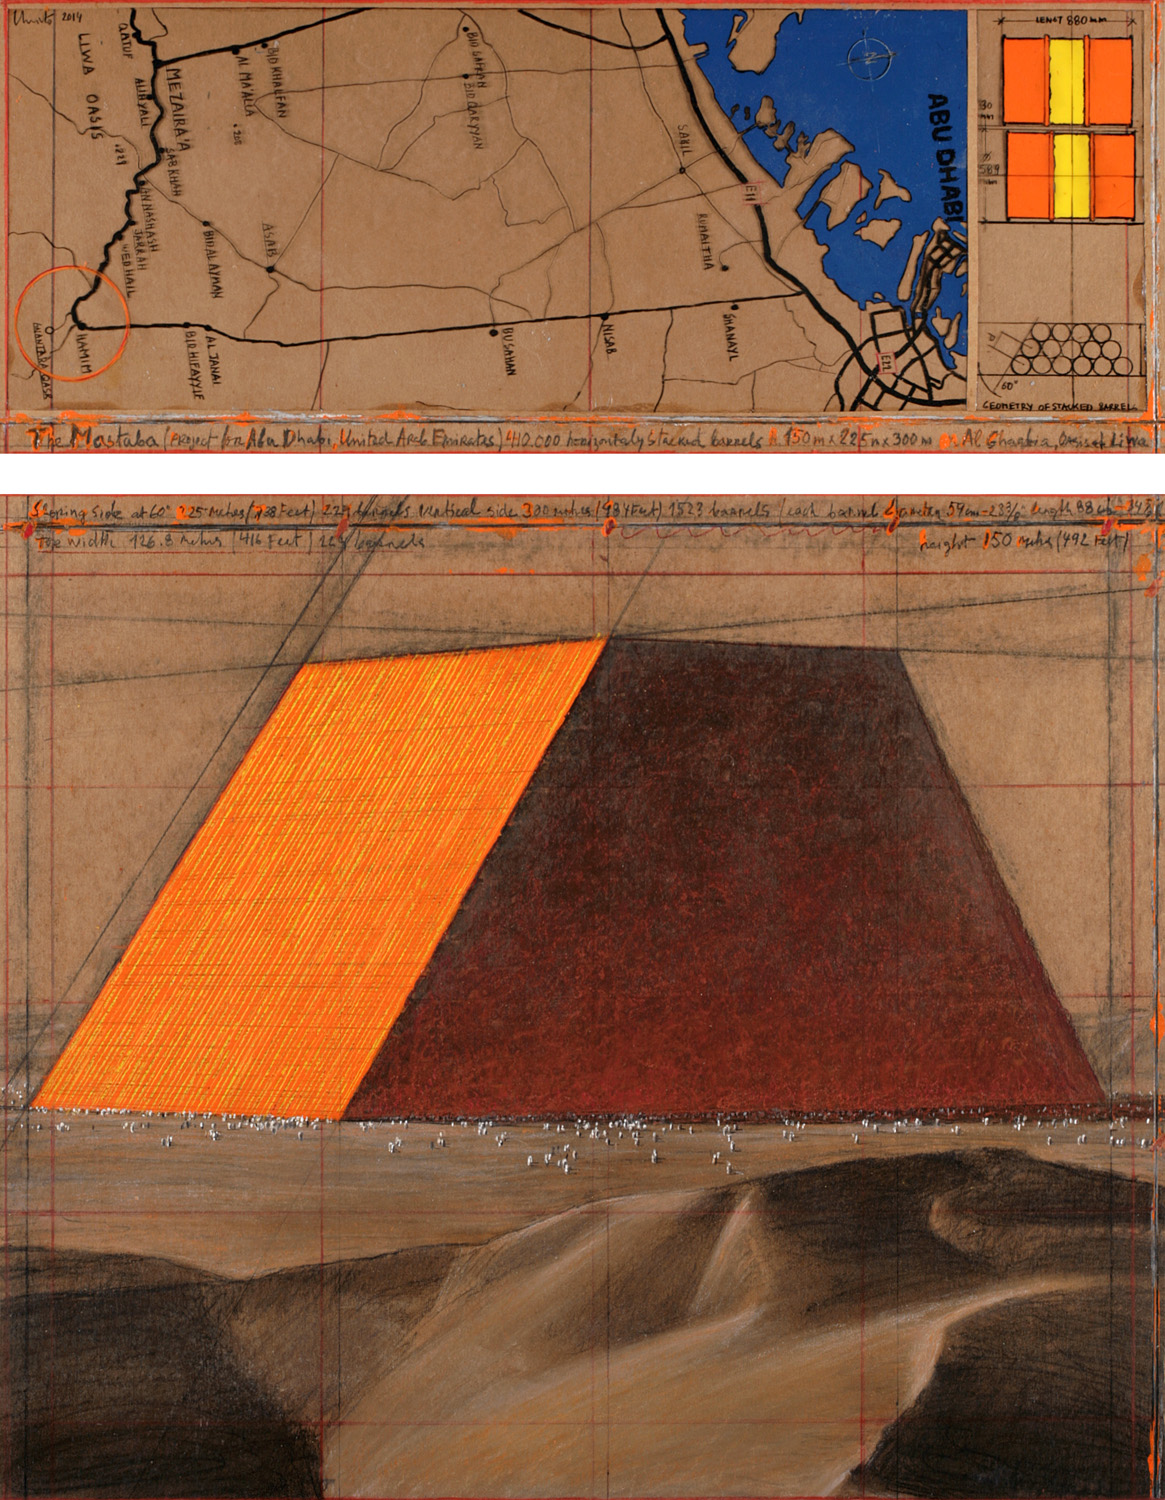 Christo, The Mastaba (Project for Abu Dhabi, United Arab Emirates), Collage 2014, in two parts 30.5 x 77.5 cm and 66.7 x 77.5 cm, pencil, charcoal, pastel, wax crayon, enamel paint, hand-drawn map and technical data on rodoid and tape on brown board. Photo: André Grossmann © 2014 Christo